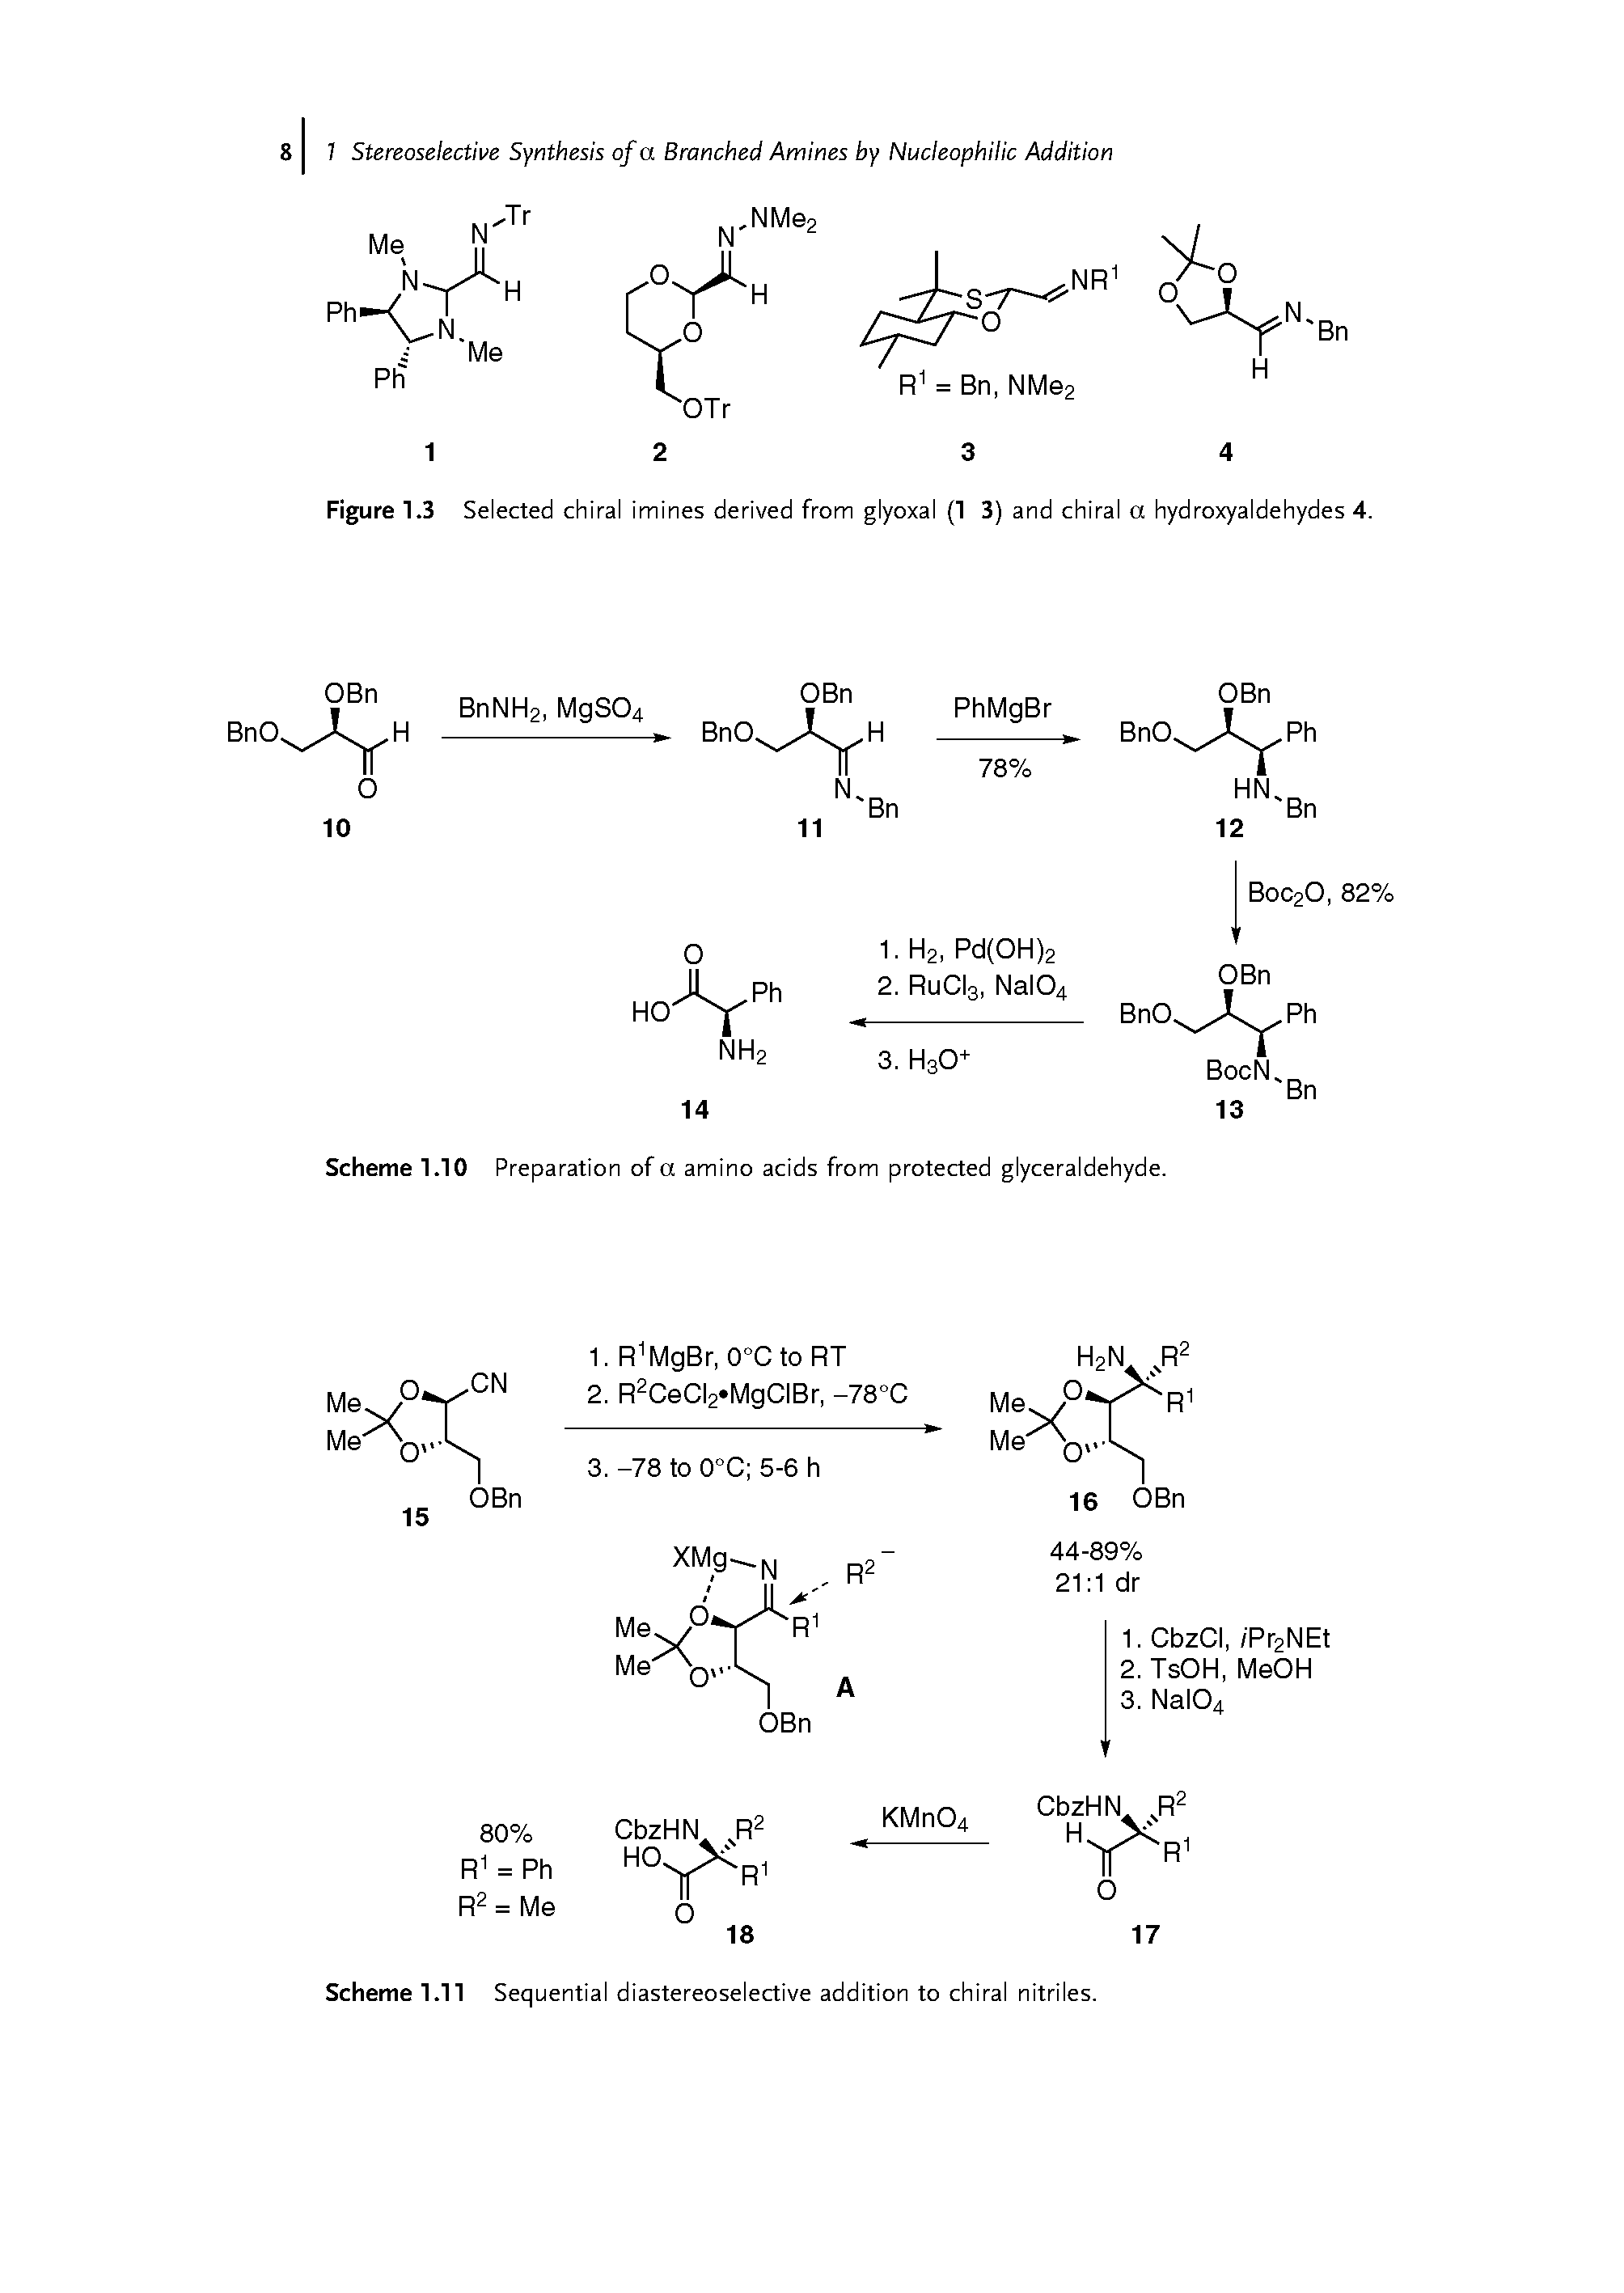 Scheme 1.10 Preparation of a amino acids from protected glyceraldehyde.